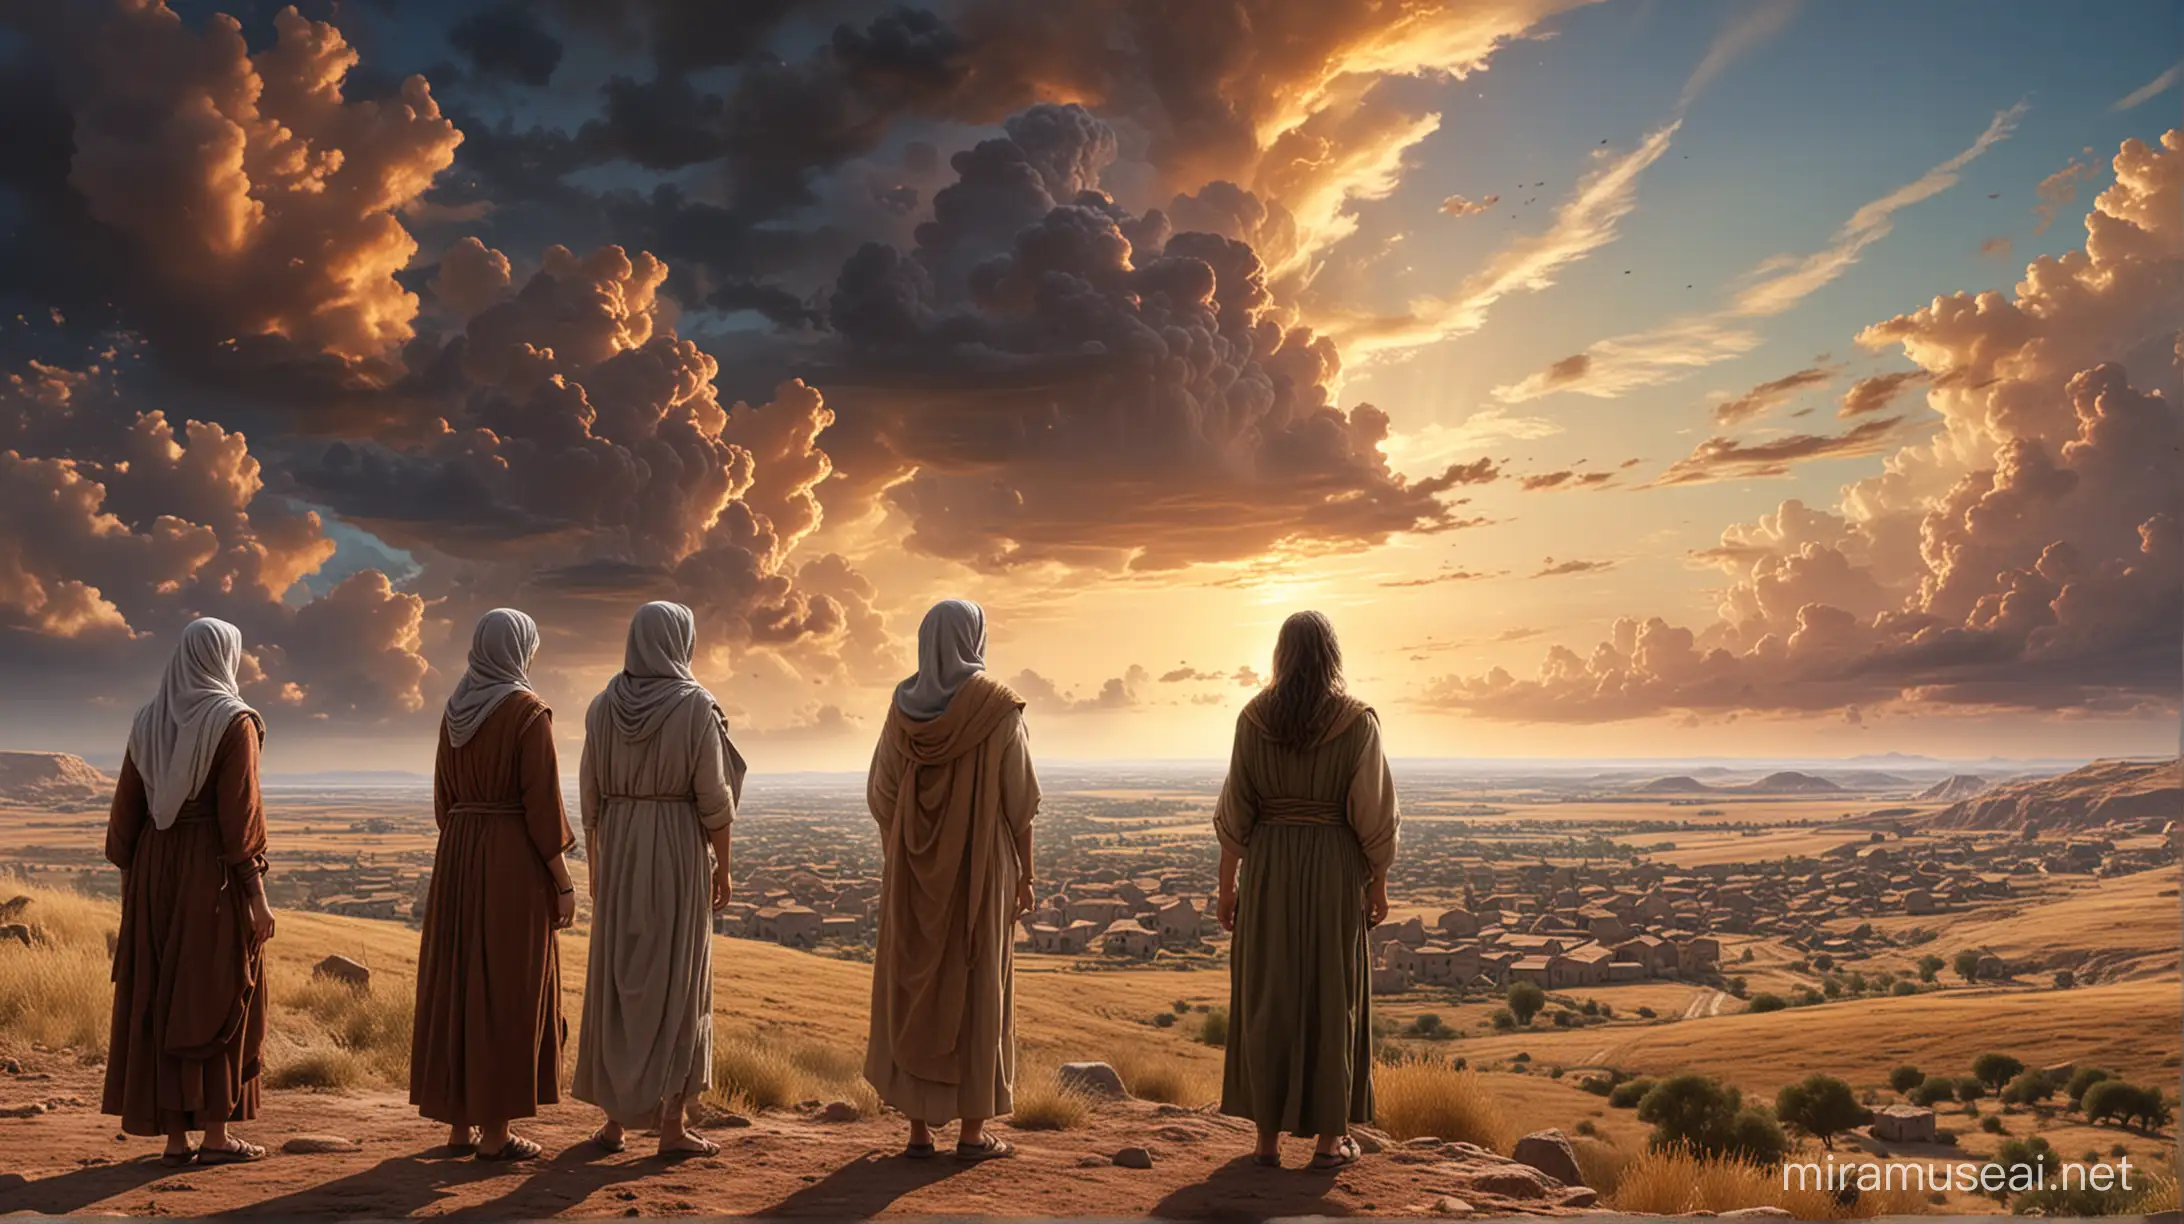 Moses Era Man and Three Women Gazing at Distant Village Under Majestic Sky